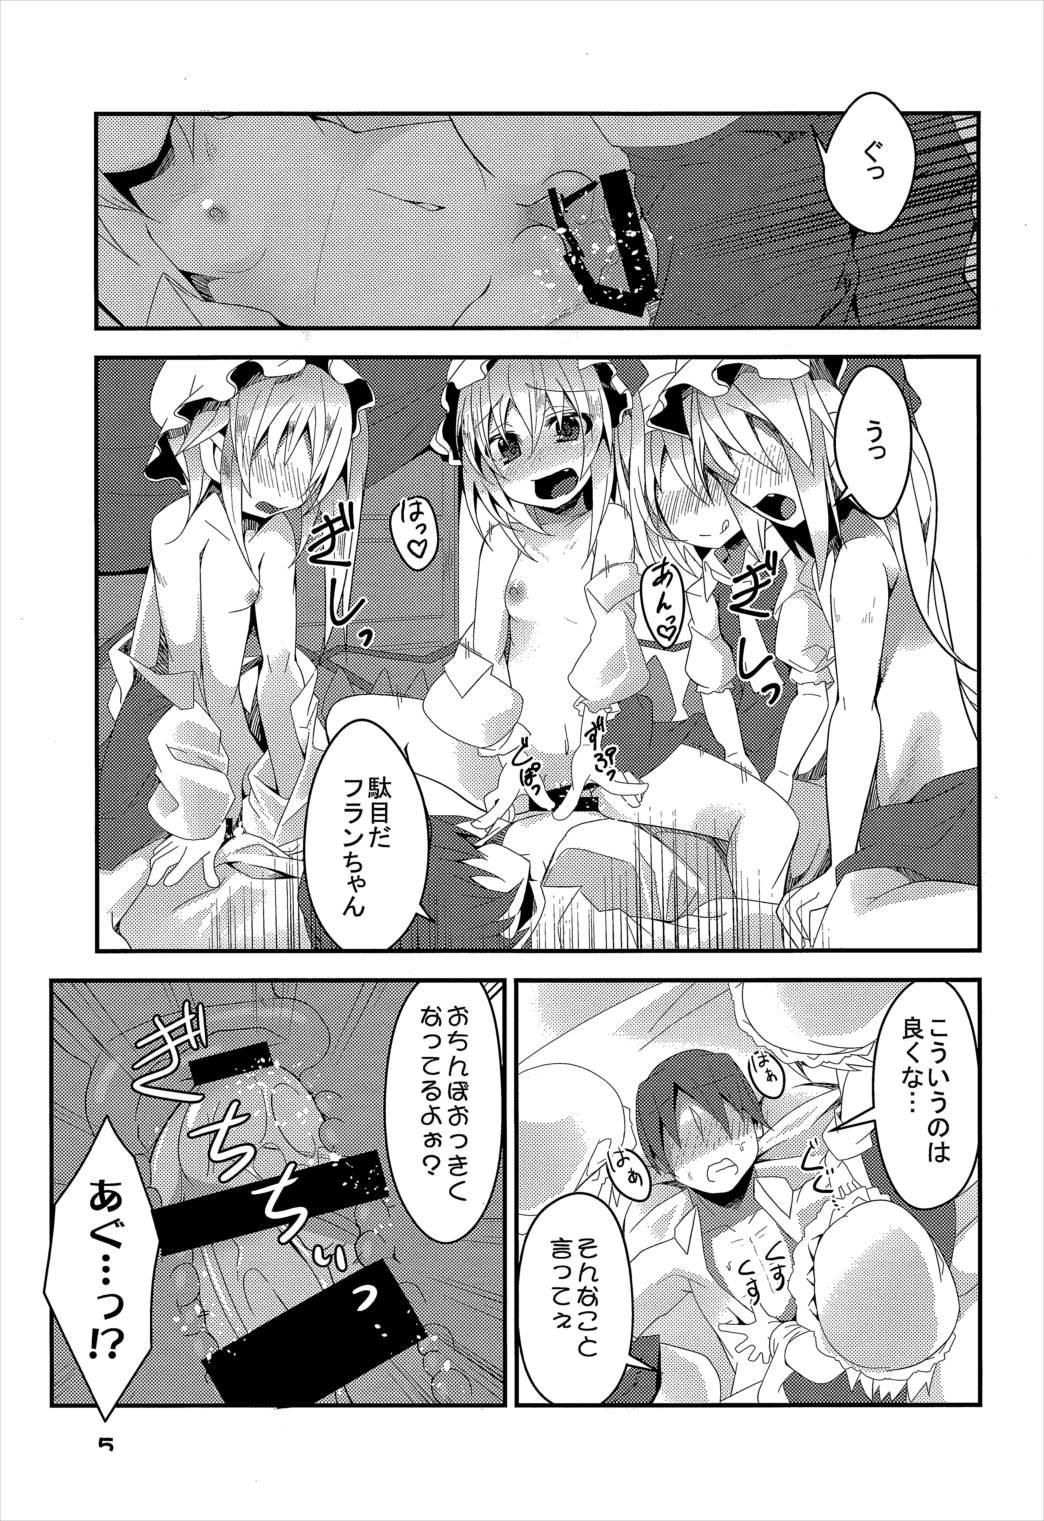 Pussysex Four of Flan-chan no Gyakushuu - Touhou project Longhair - Page 4